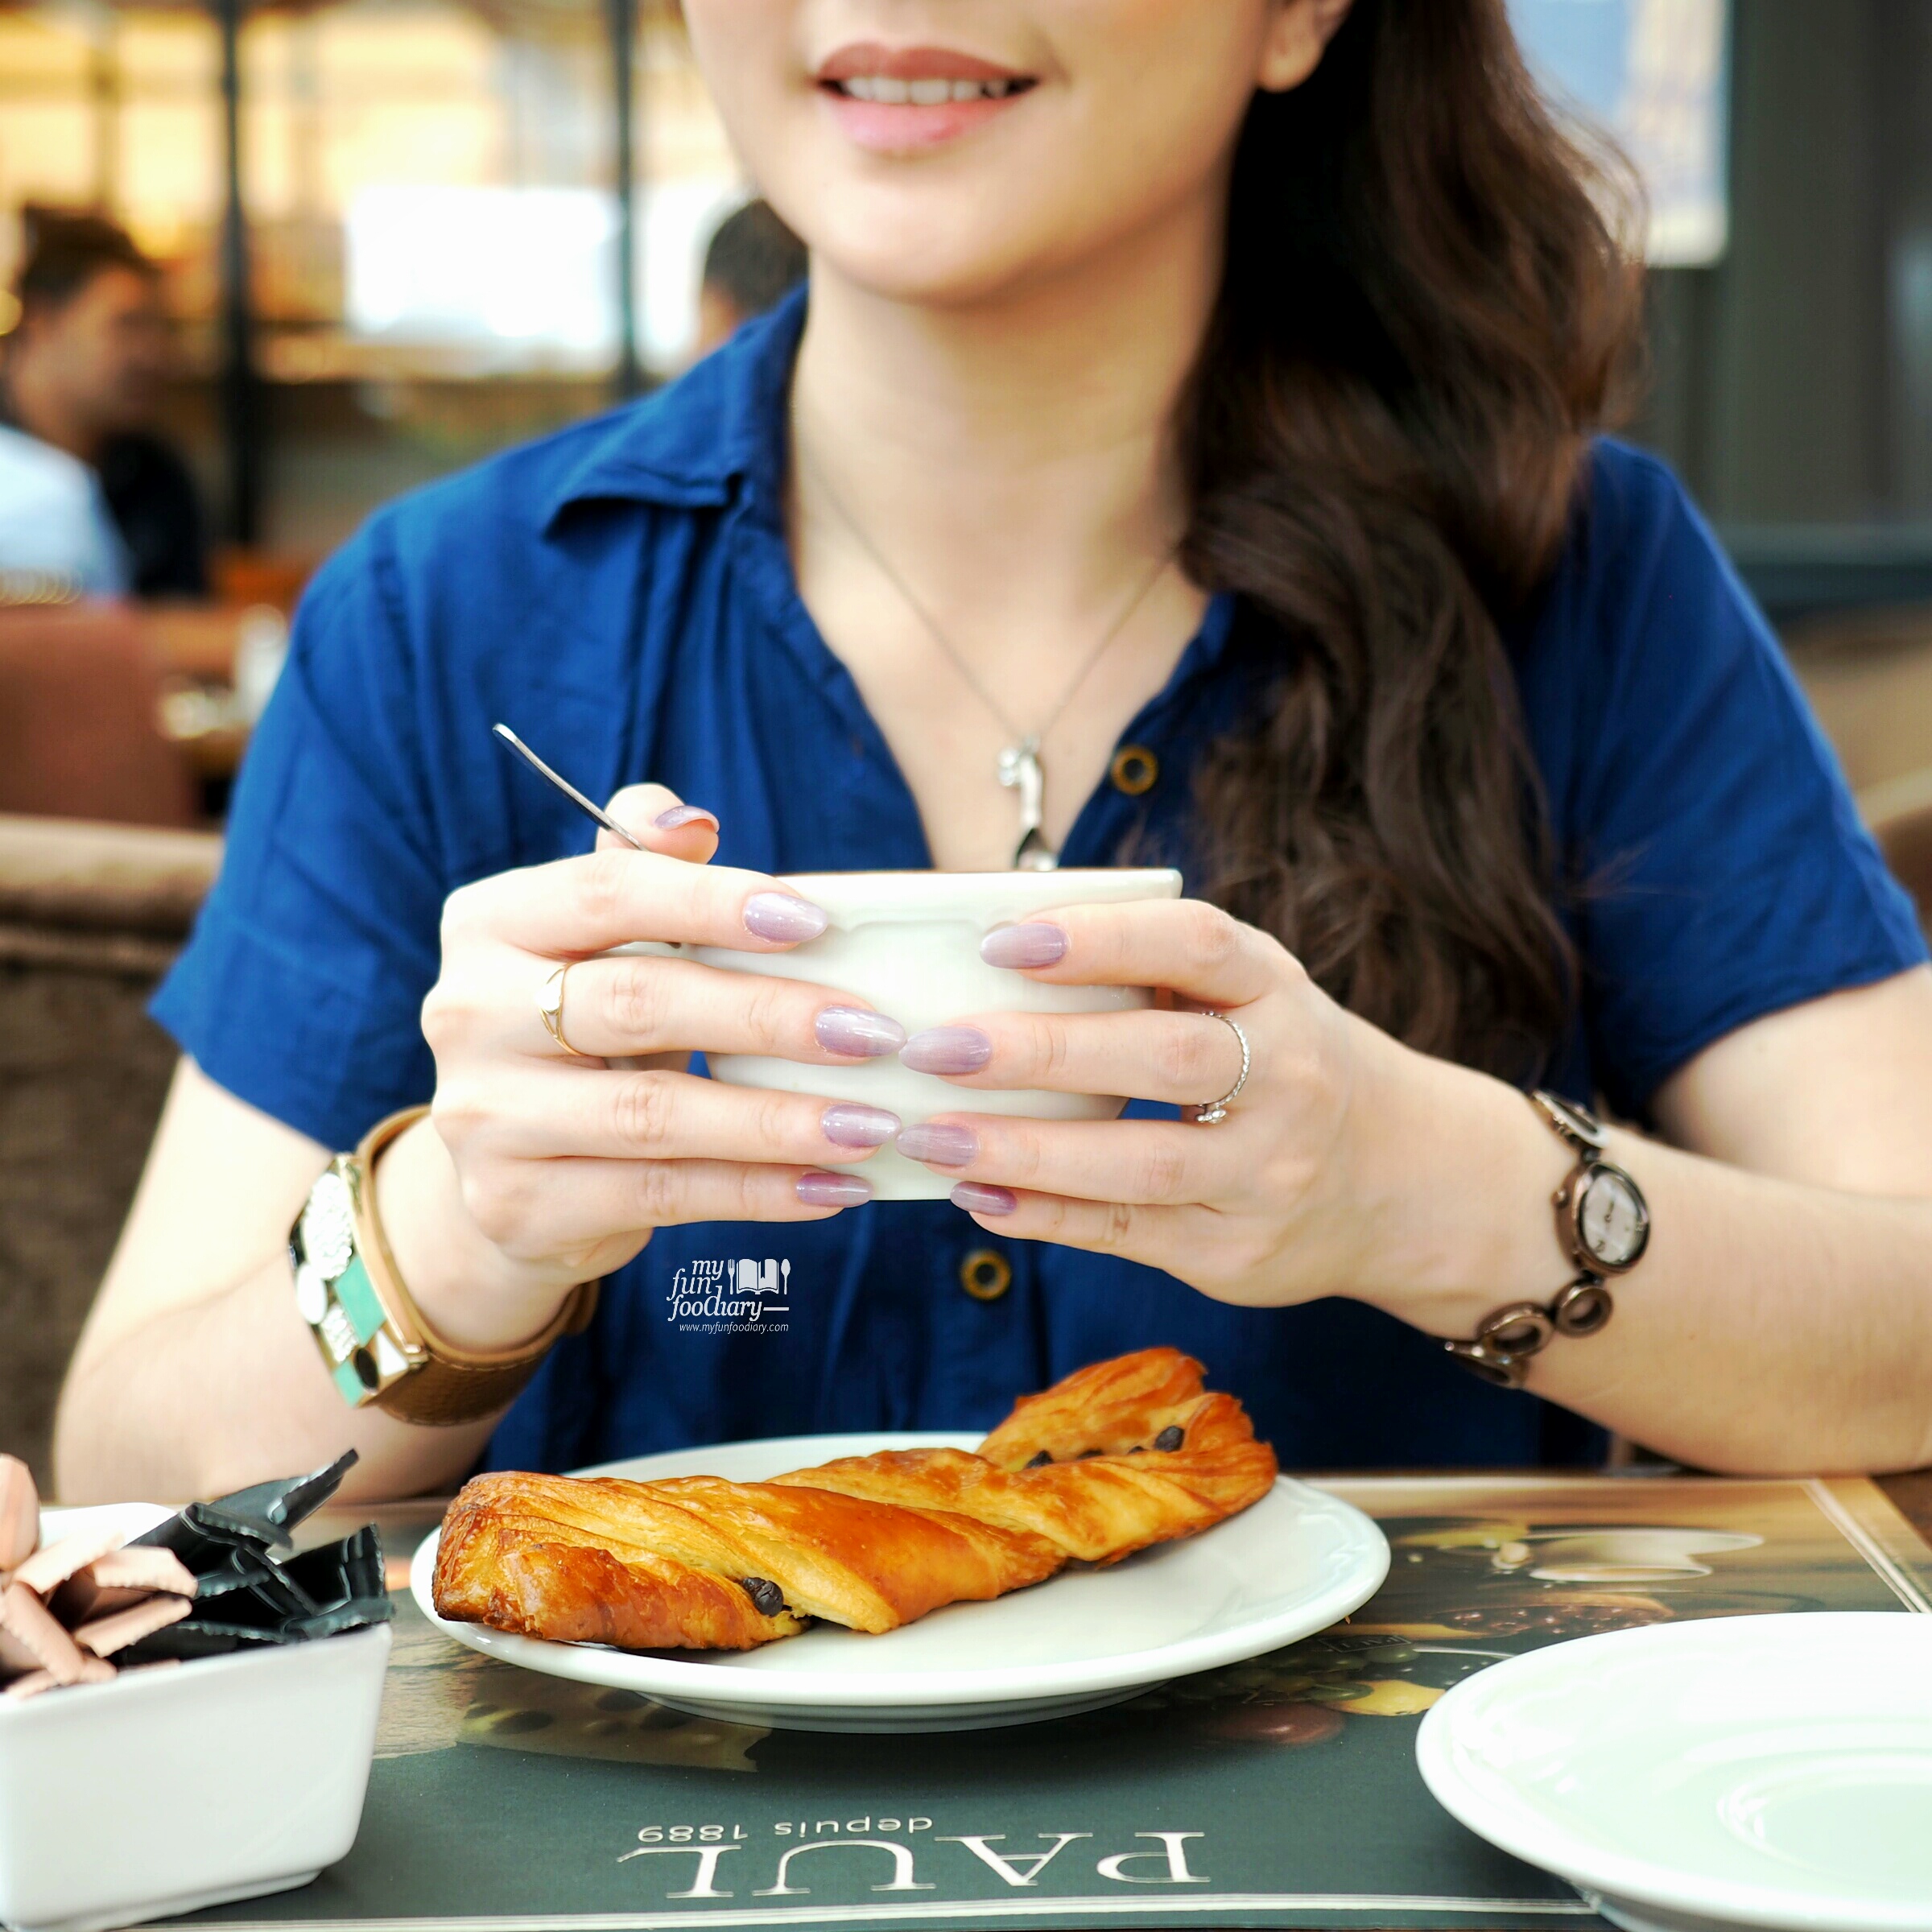 Mullie and her coffee at Paul French Bakery Jakarta by Myfunfoodiary-